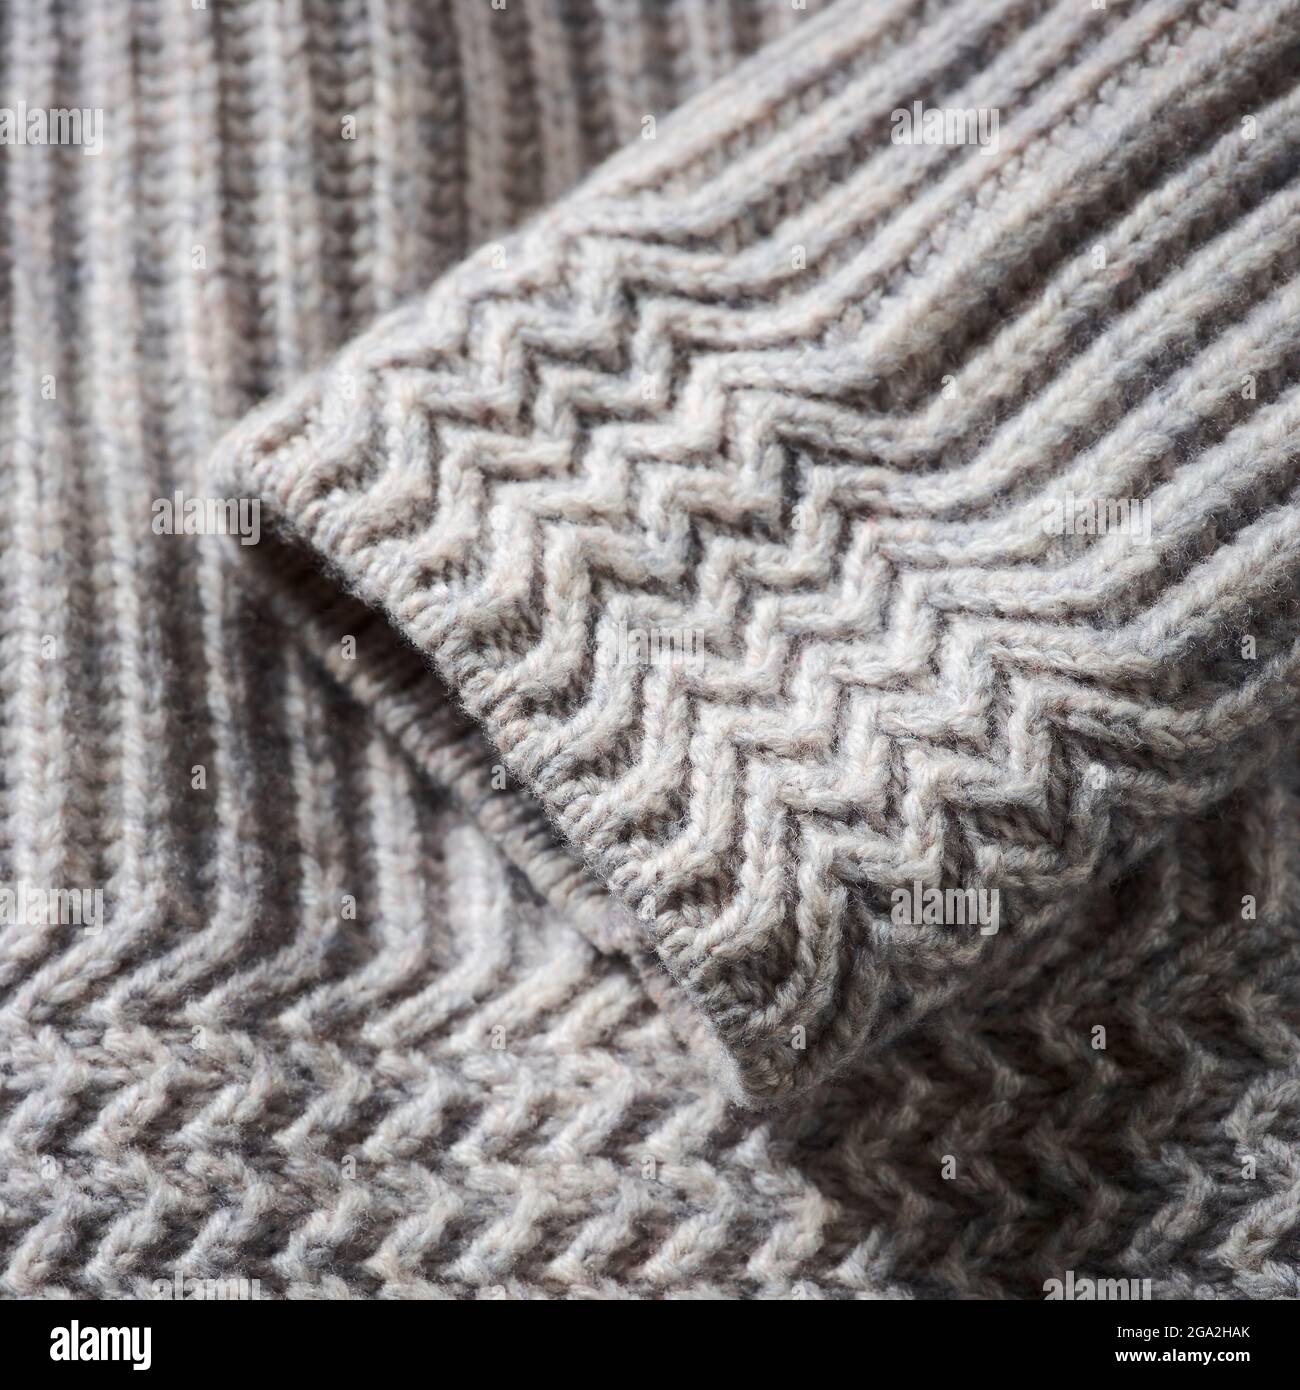 Extreme close-up of the cuff of a grey knit sweater; Studio Stock Photo